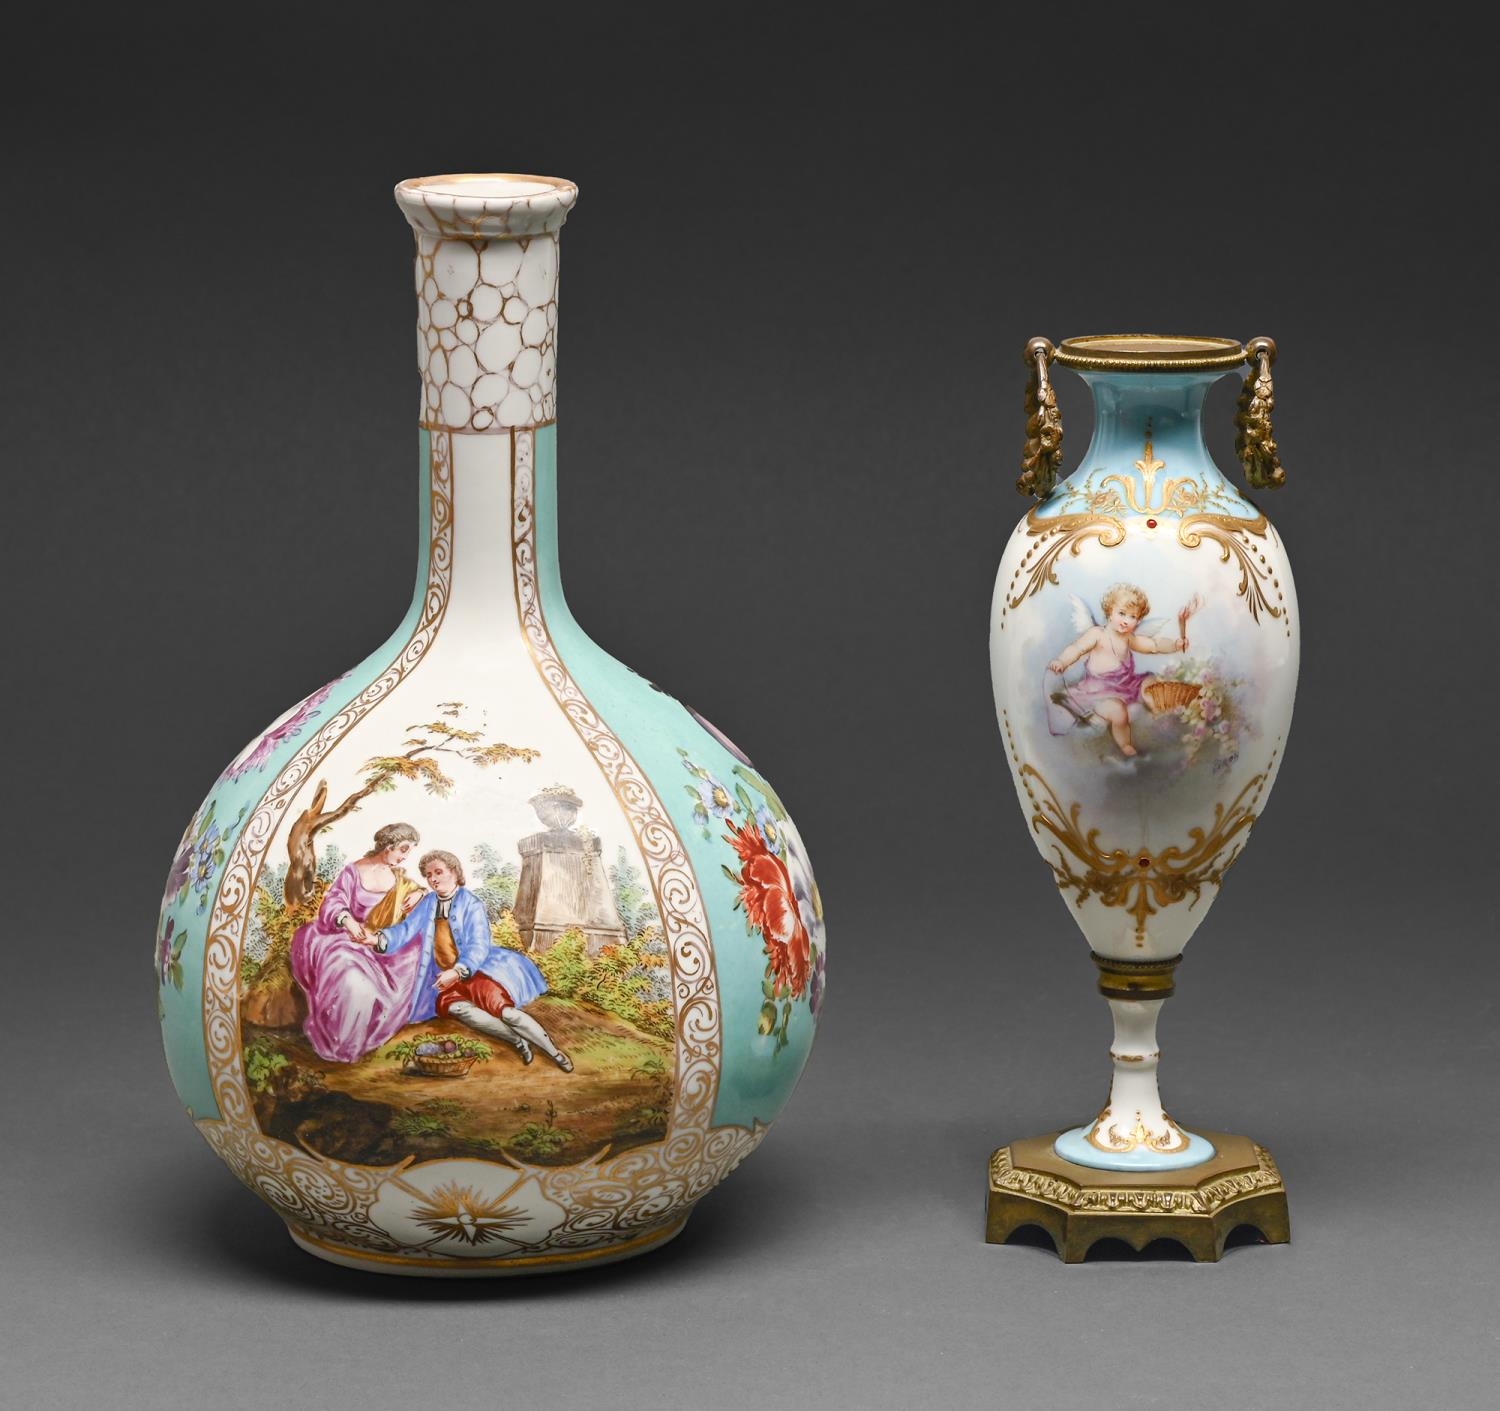 A German porcelain vase, c1900, of bottle shape, painted with scenes of lovers alternating with